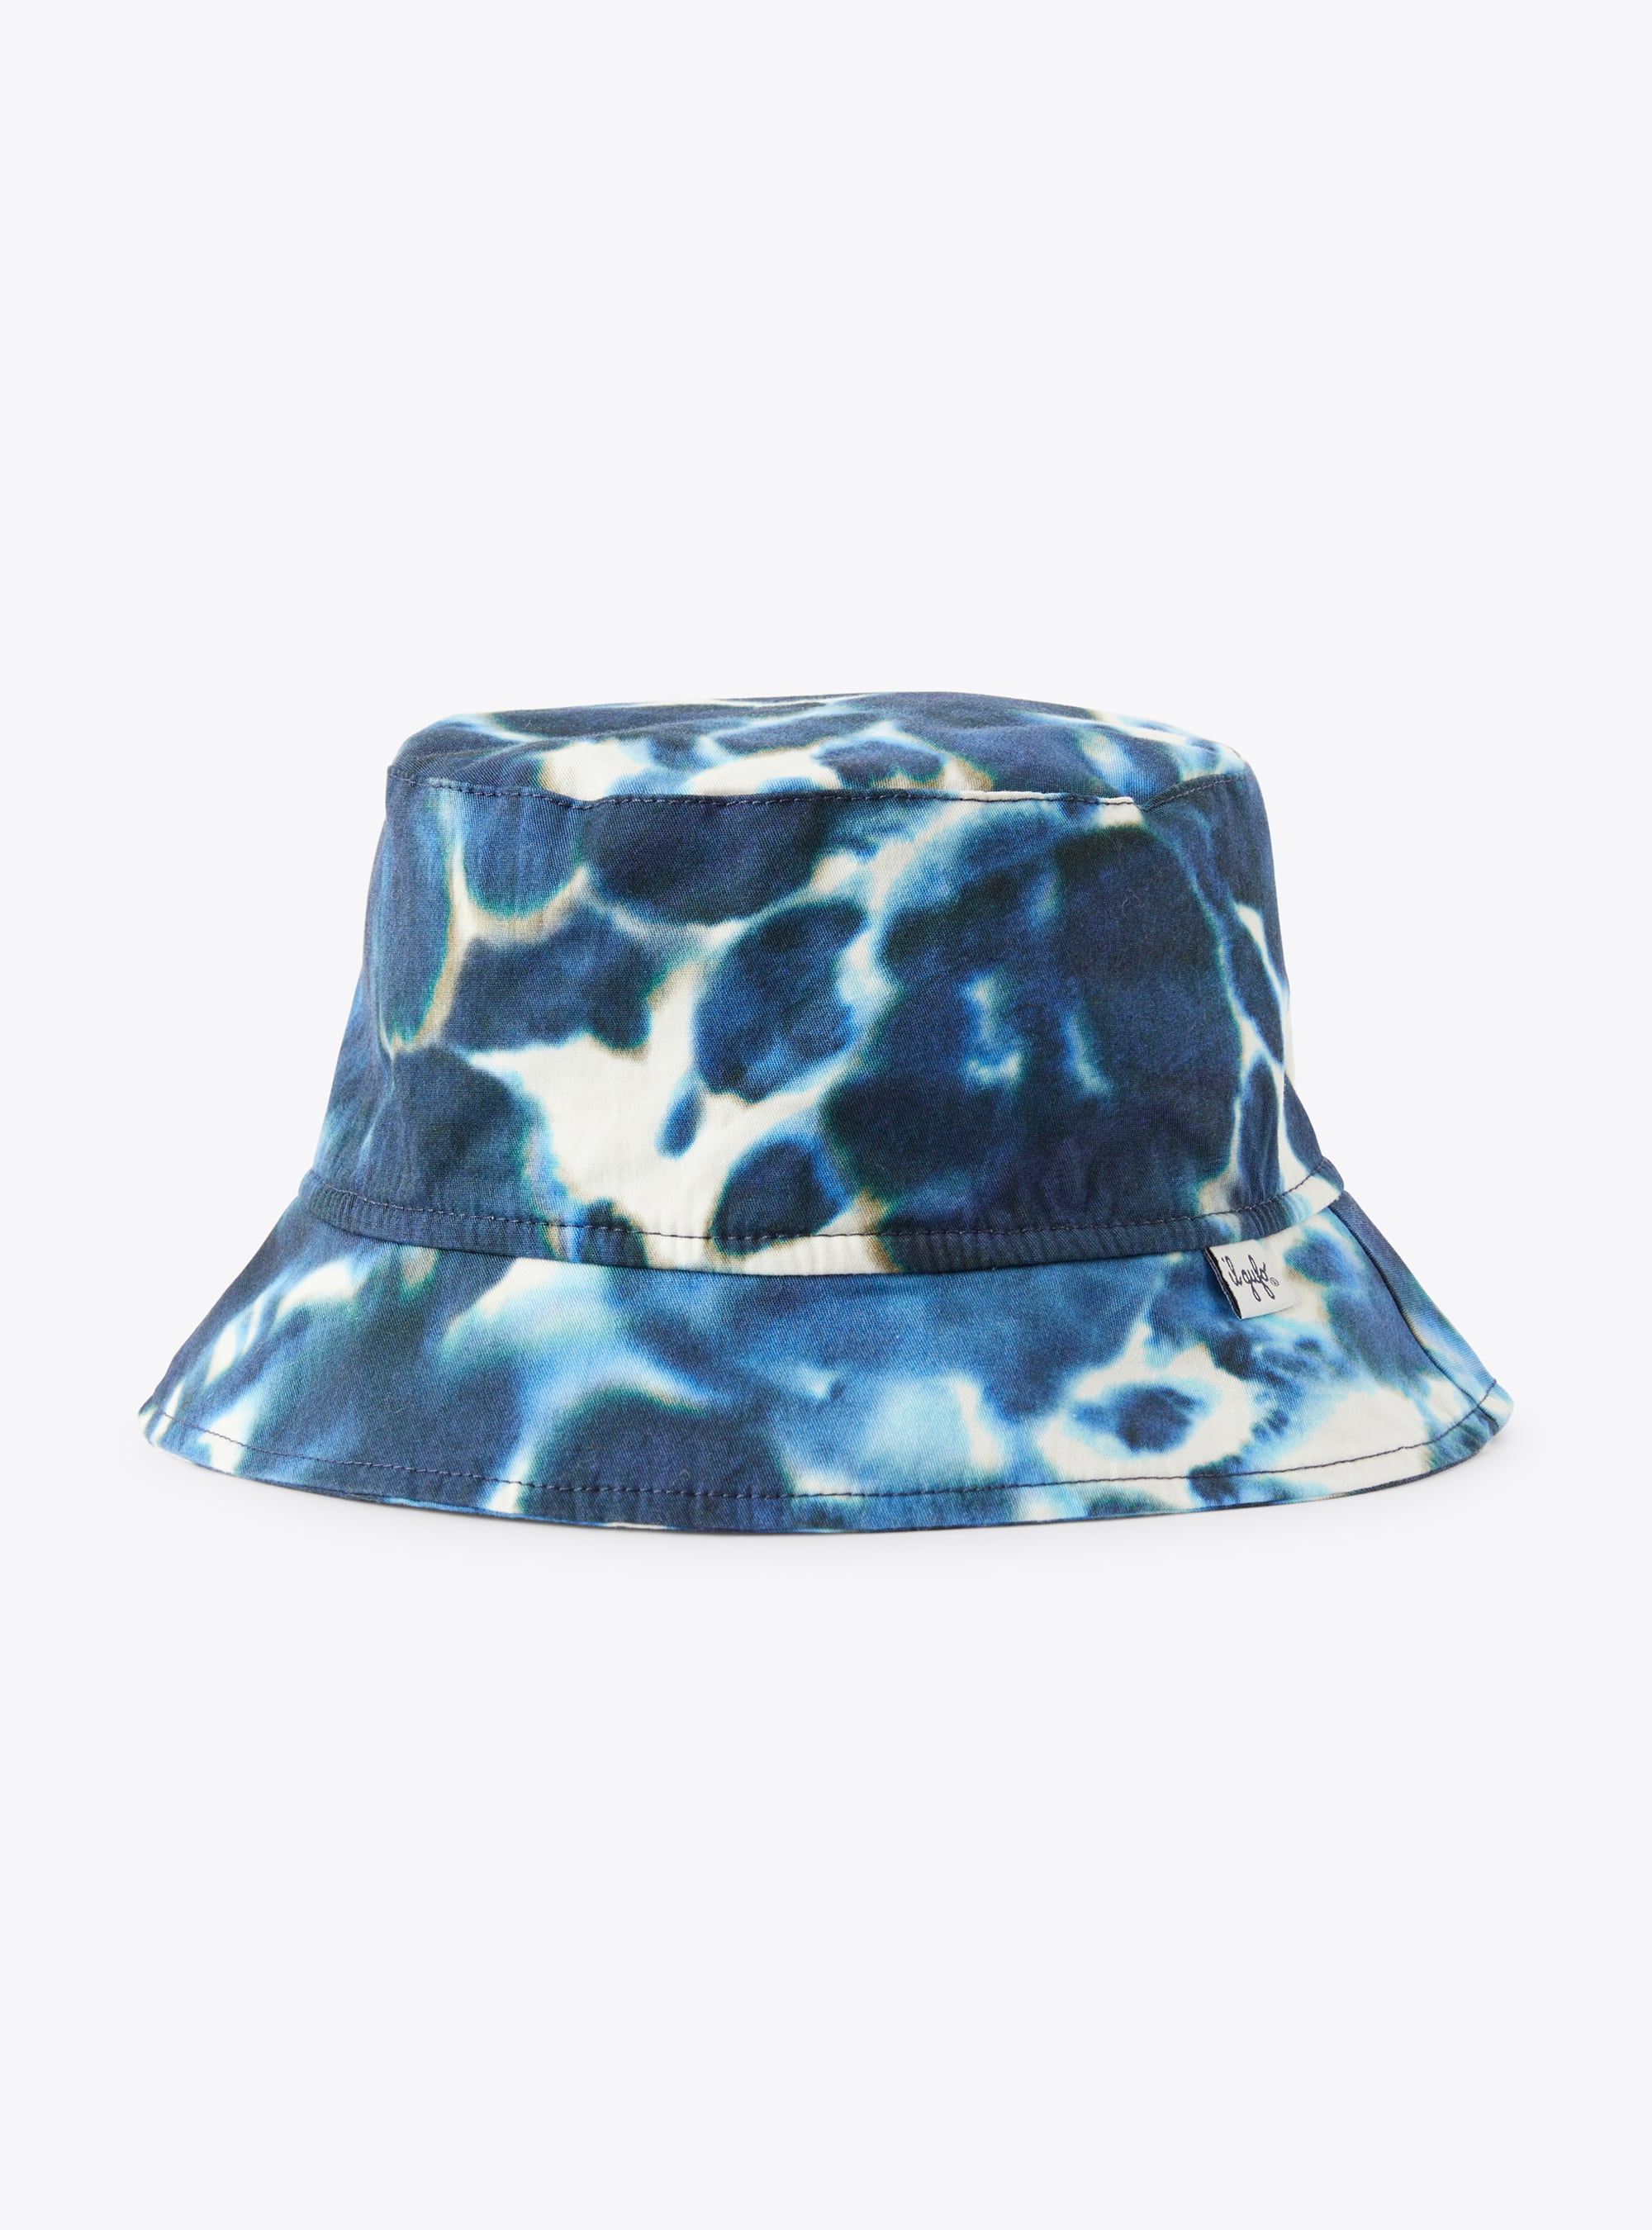 Fisherman’s hat with an exclusive print design - Accessories - Il Gufo